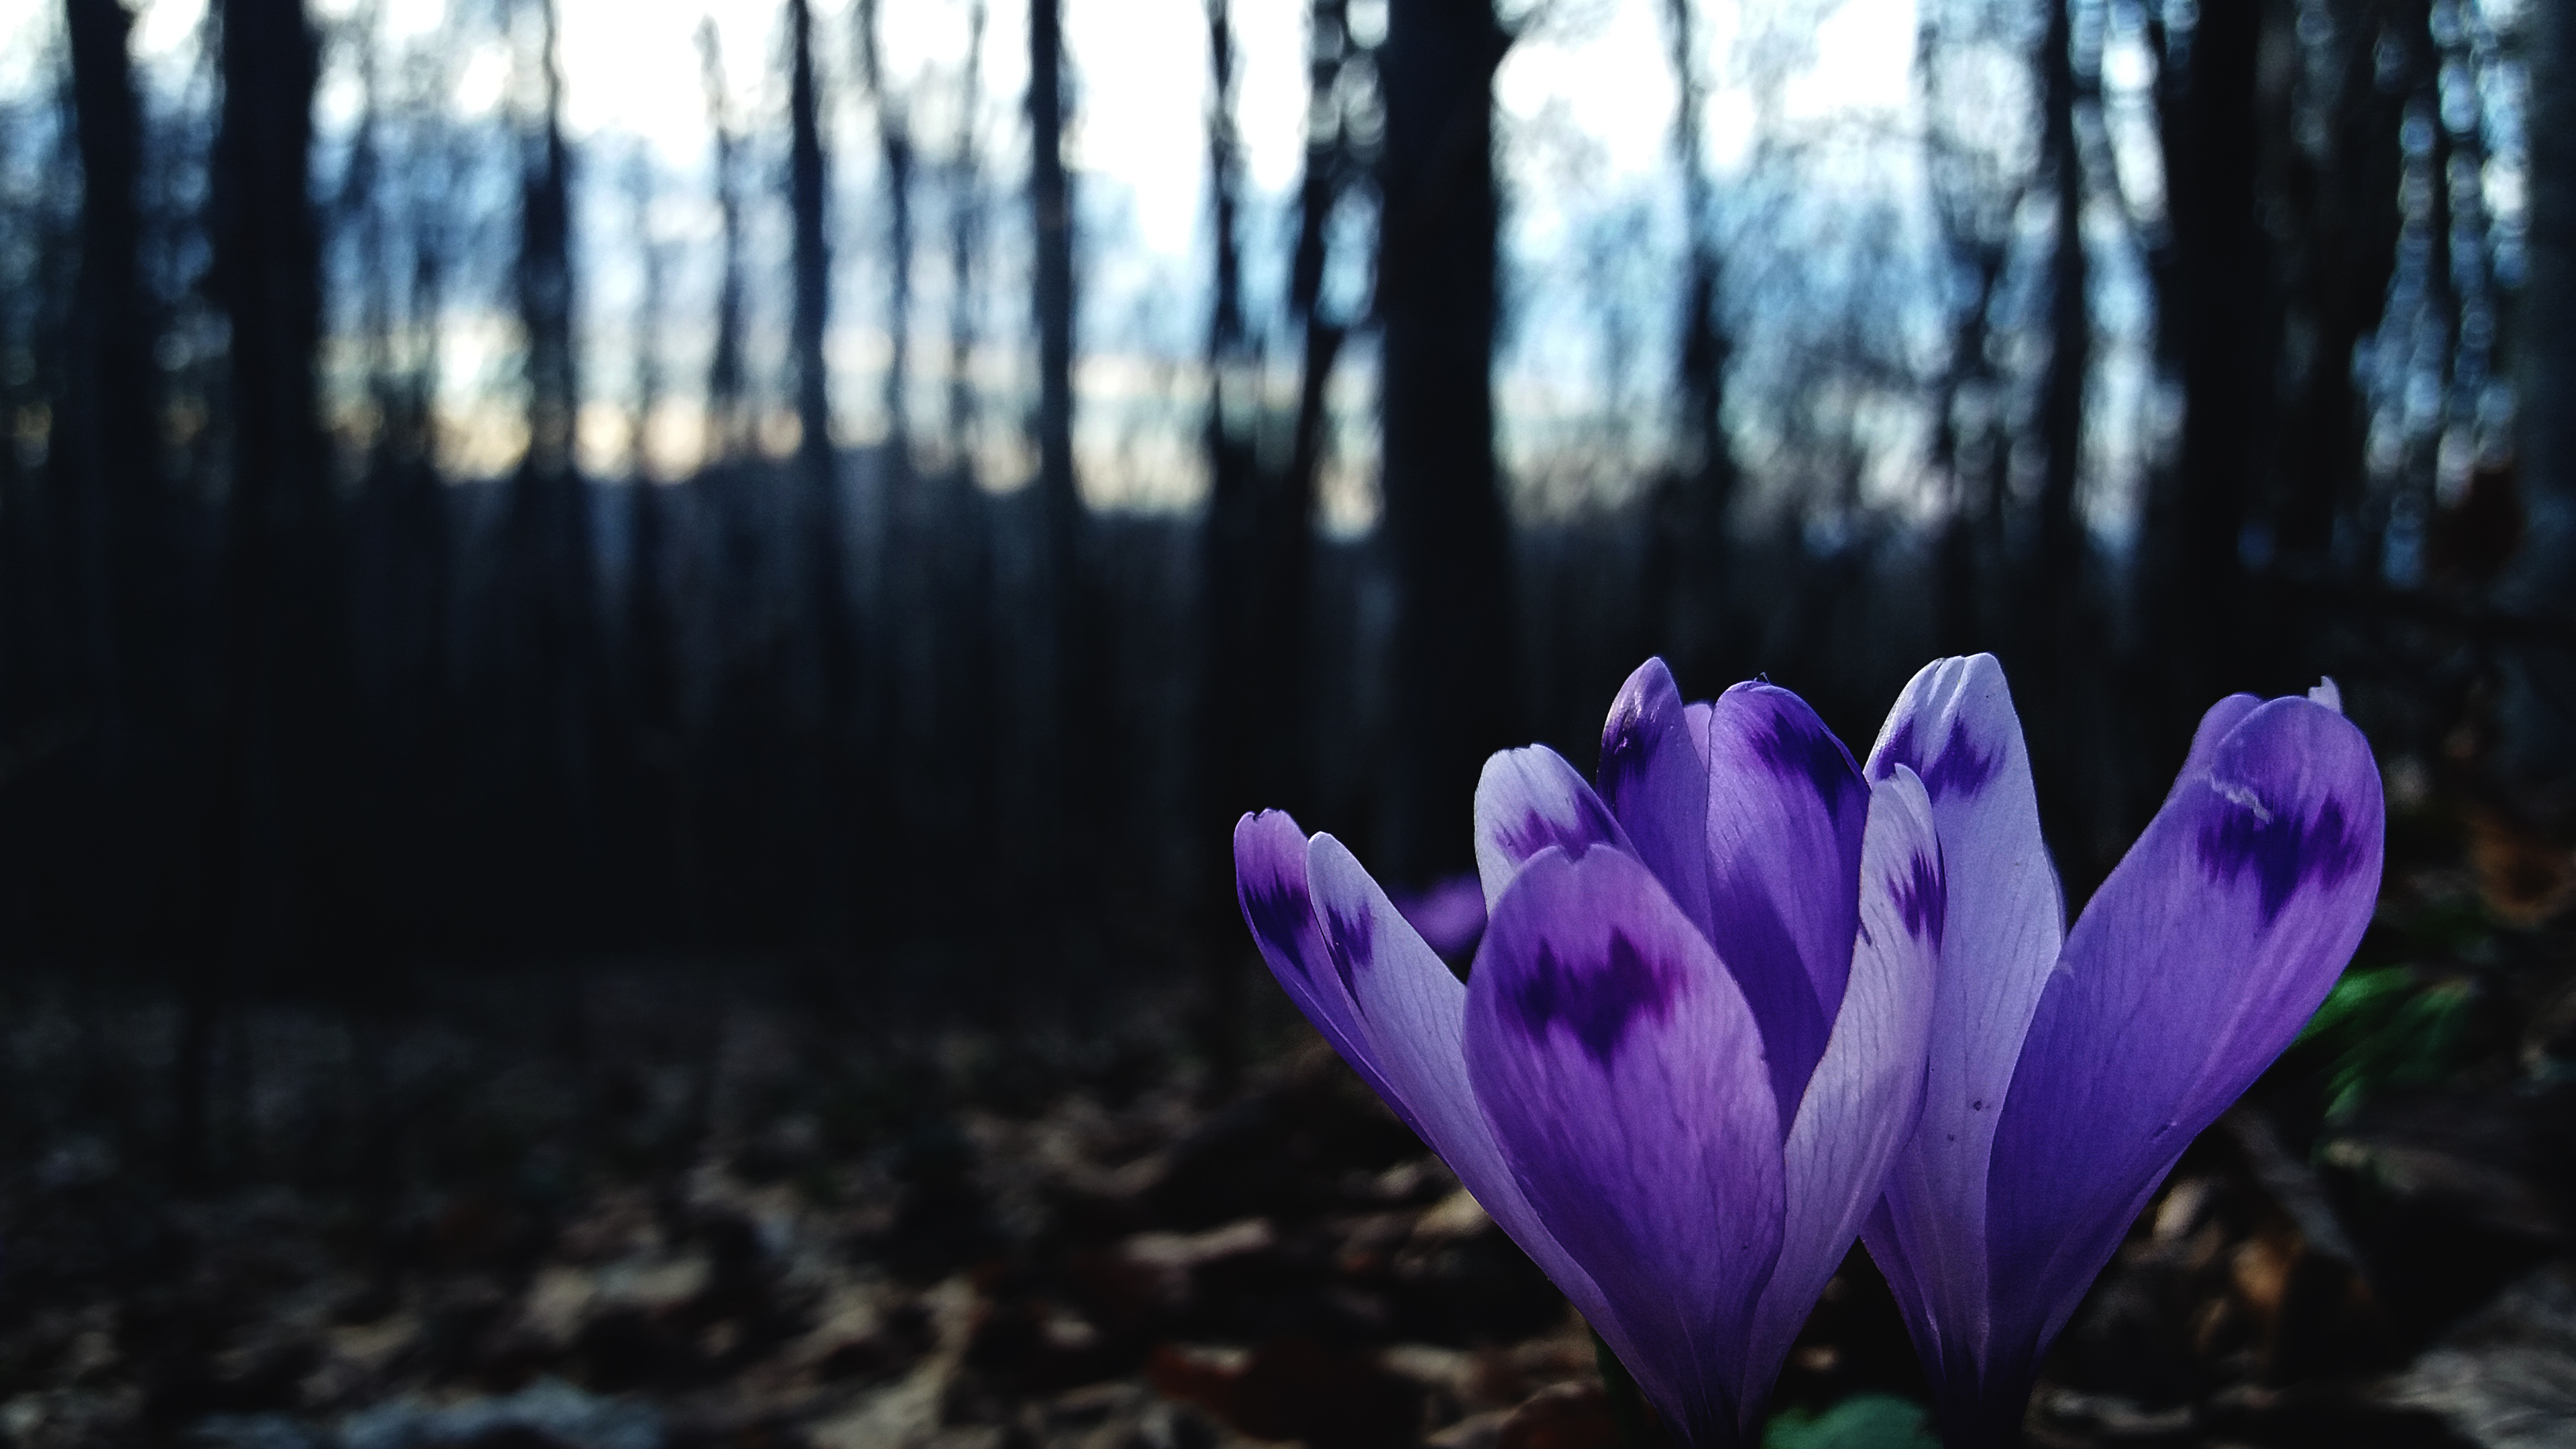 Nature Forest Leaves Trees Beech Flowers Crocus Mountains Bokeh Spring Blurred 3840x2160